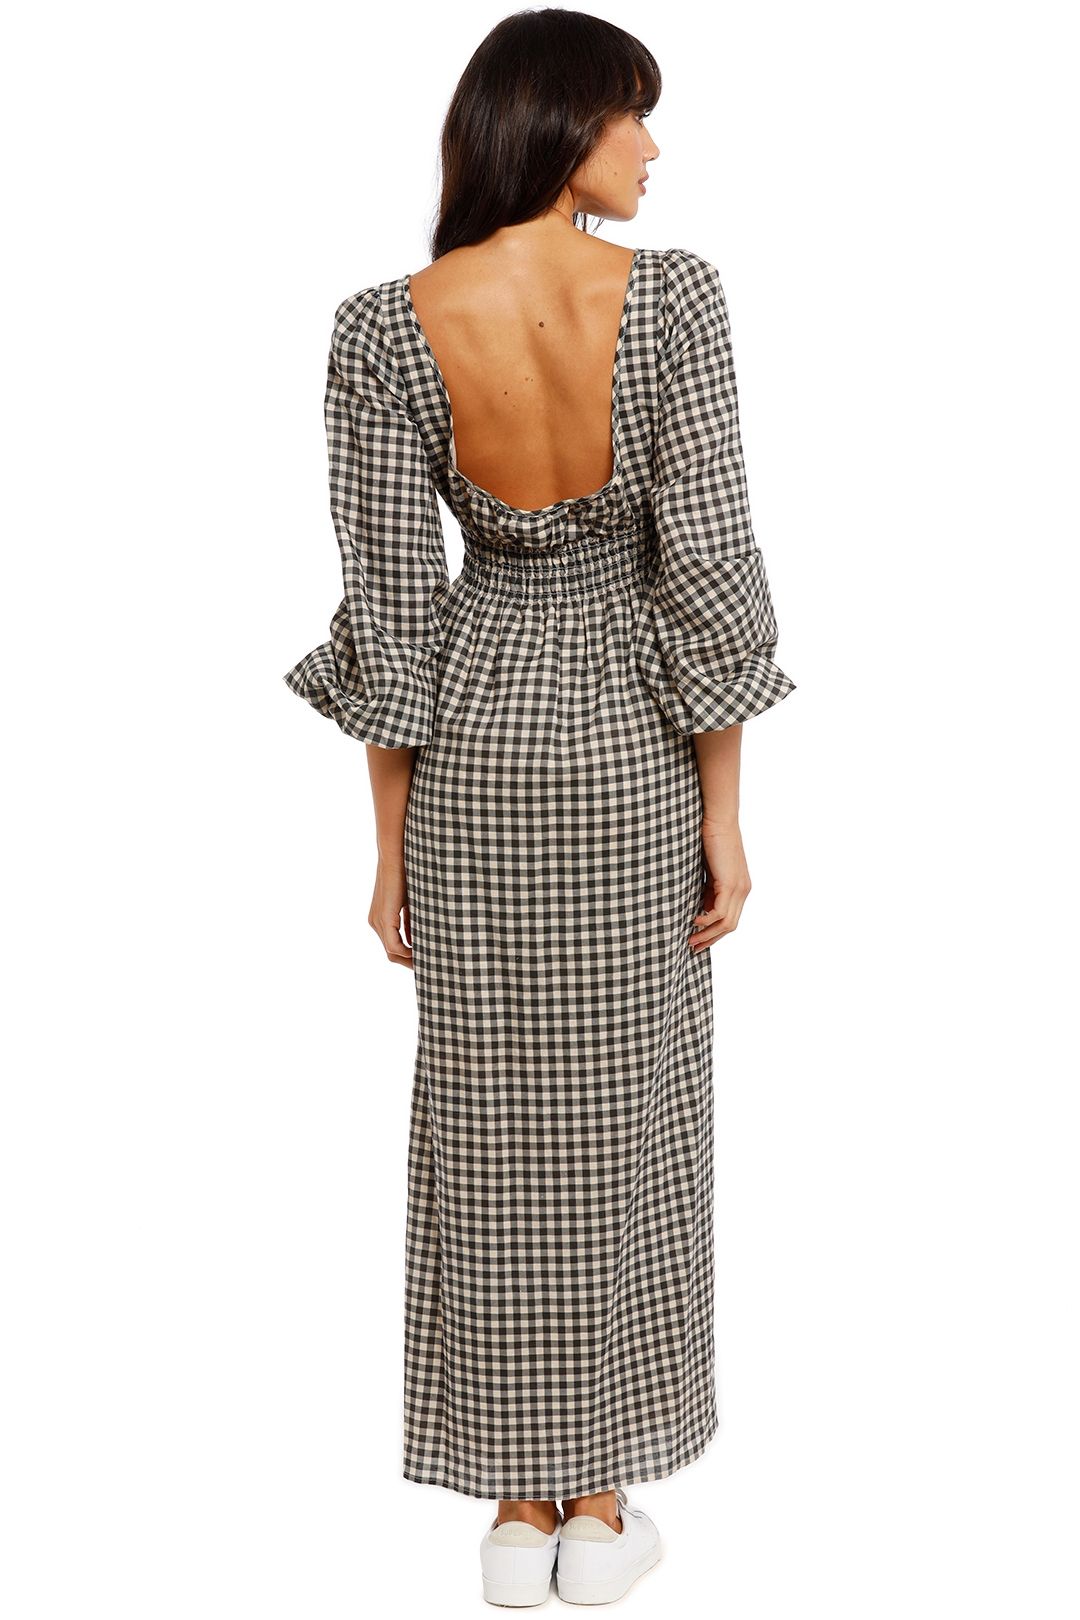 Charlie Holiday Daphine Gingham Backless